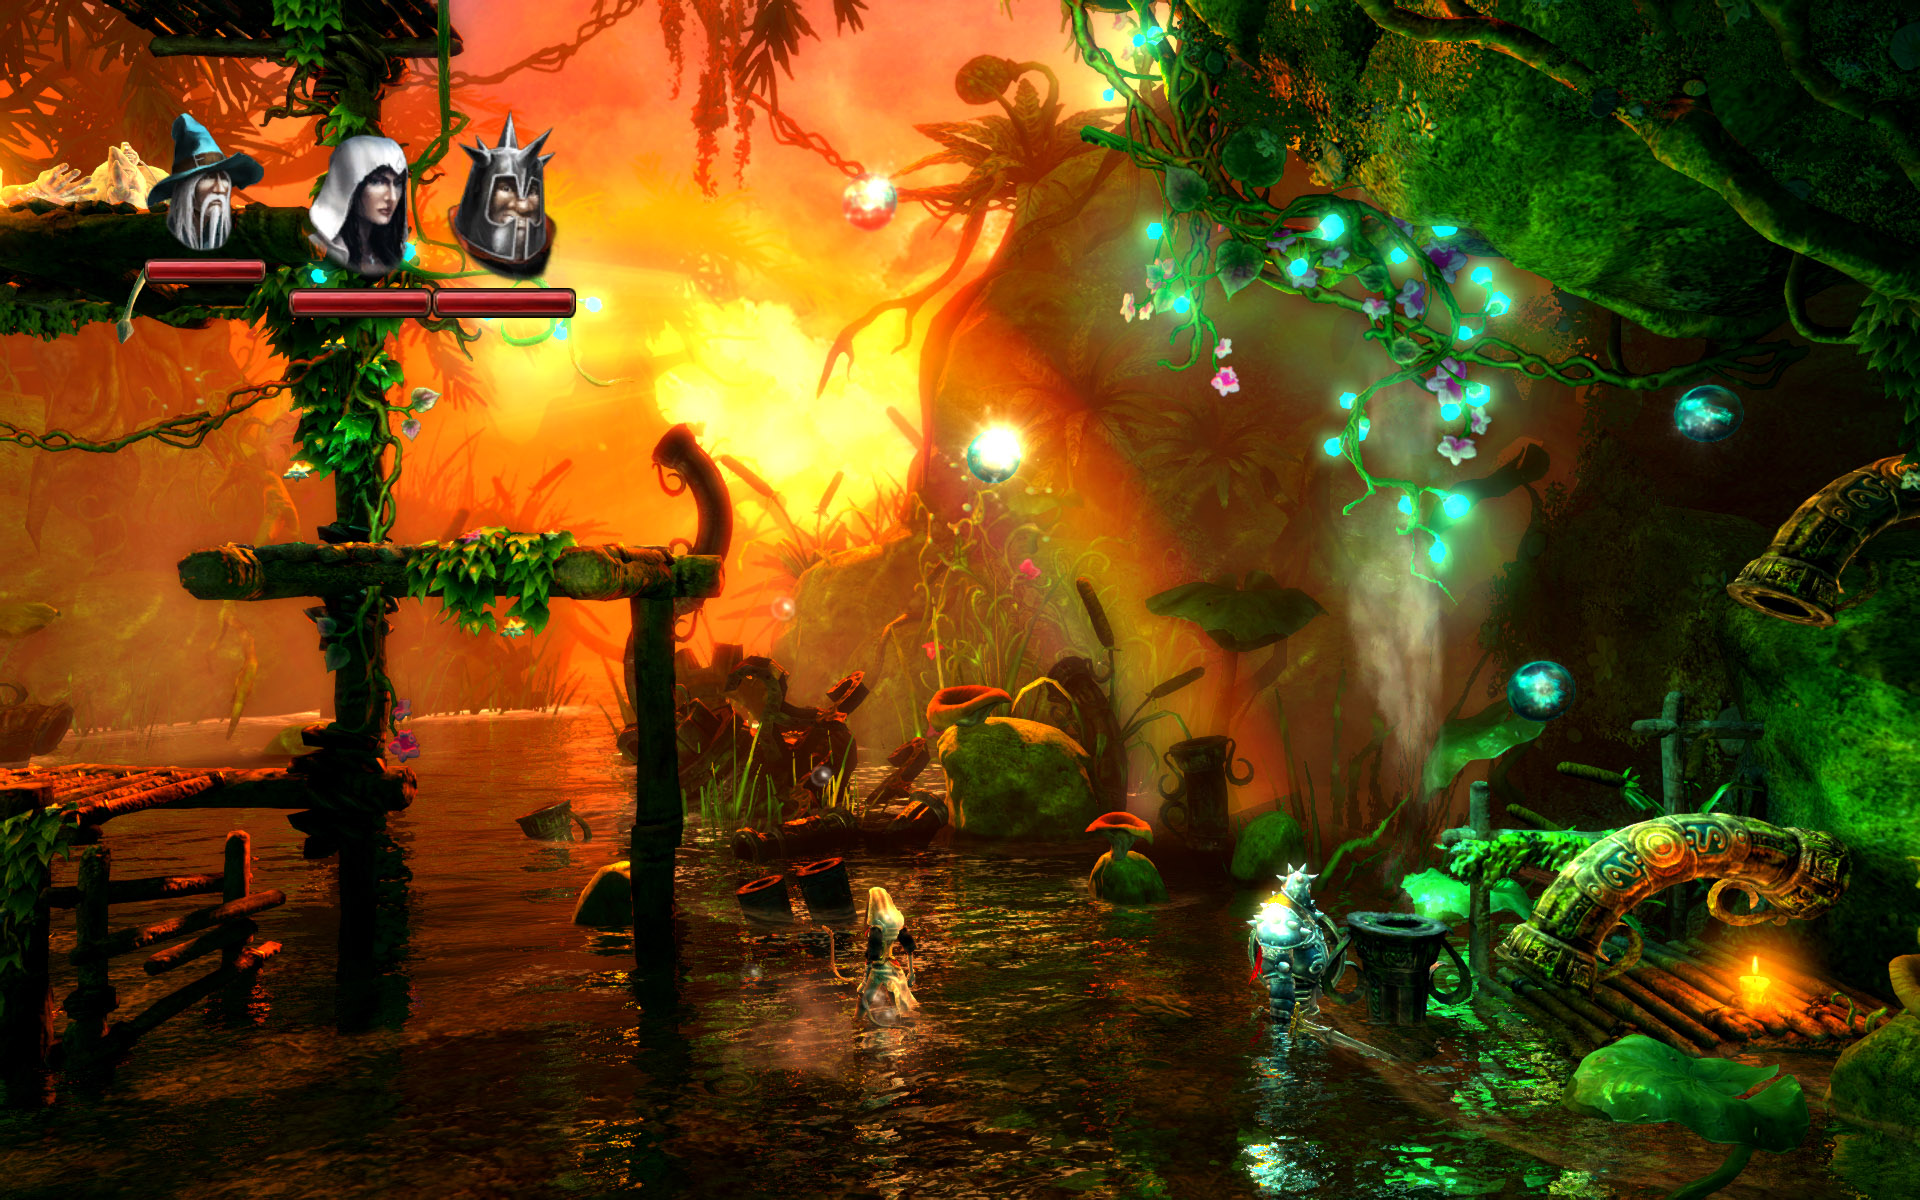 difference between trine and trine enchanted edition